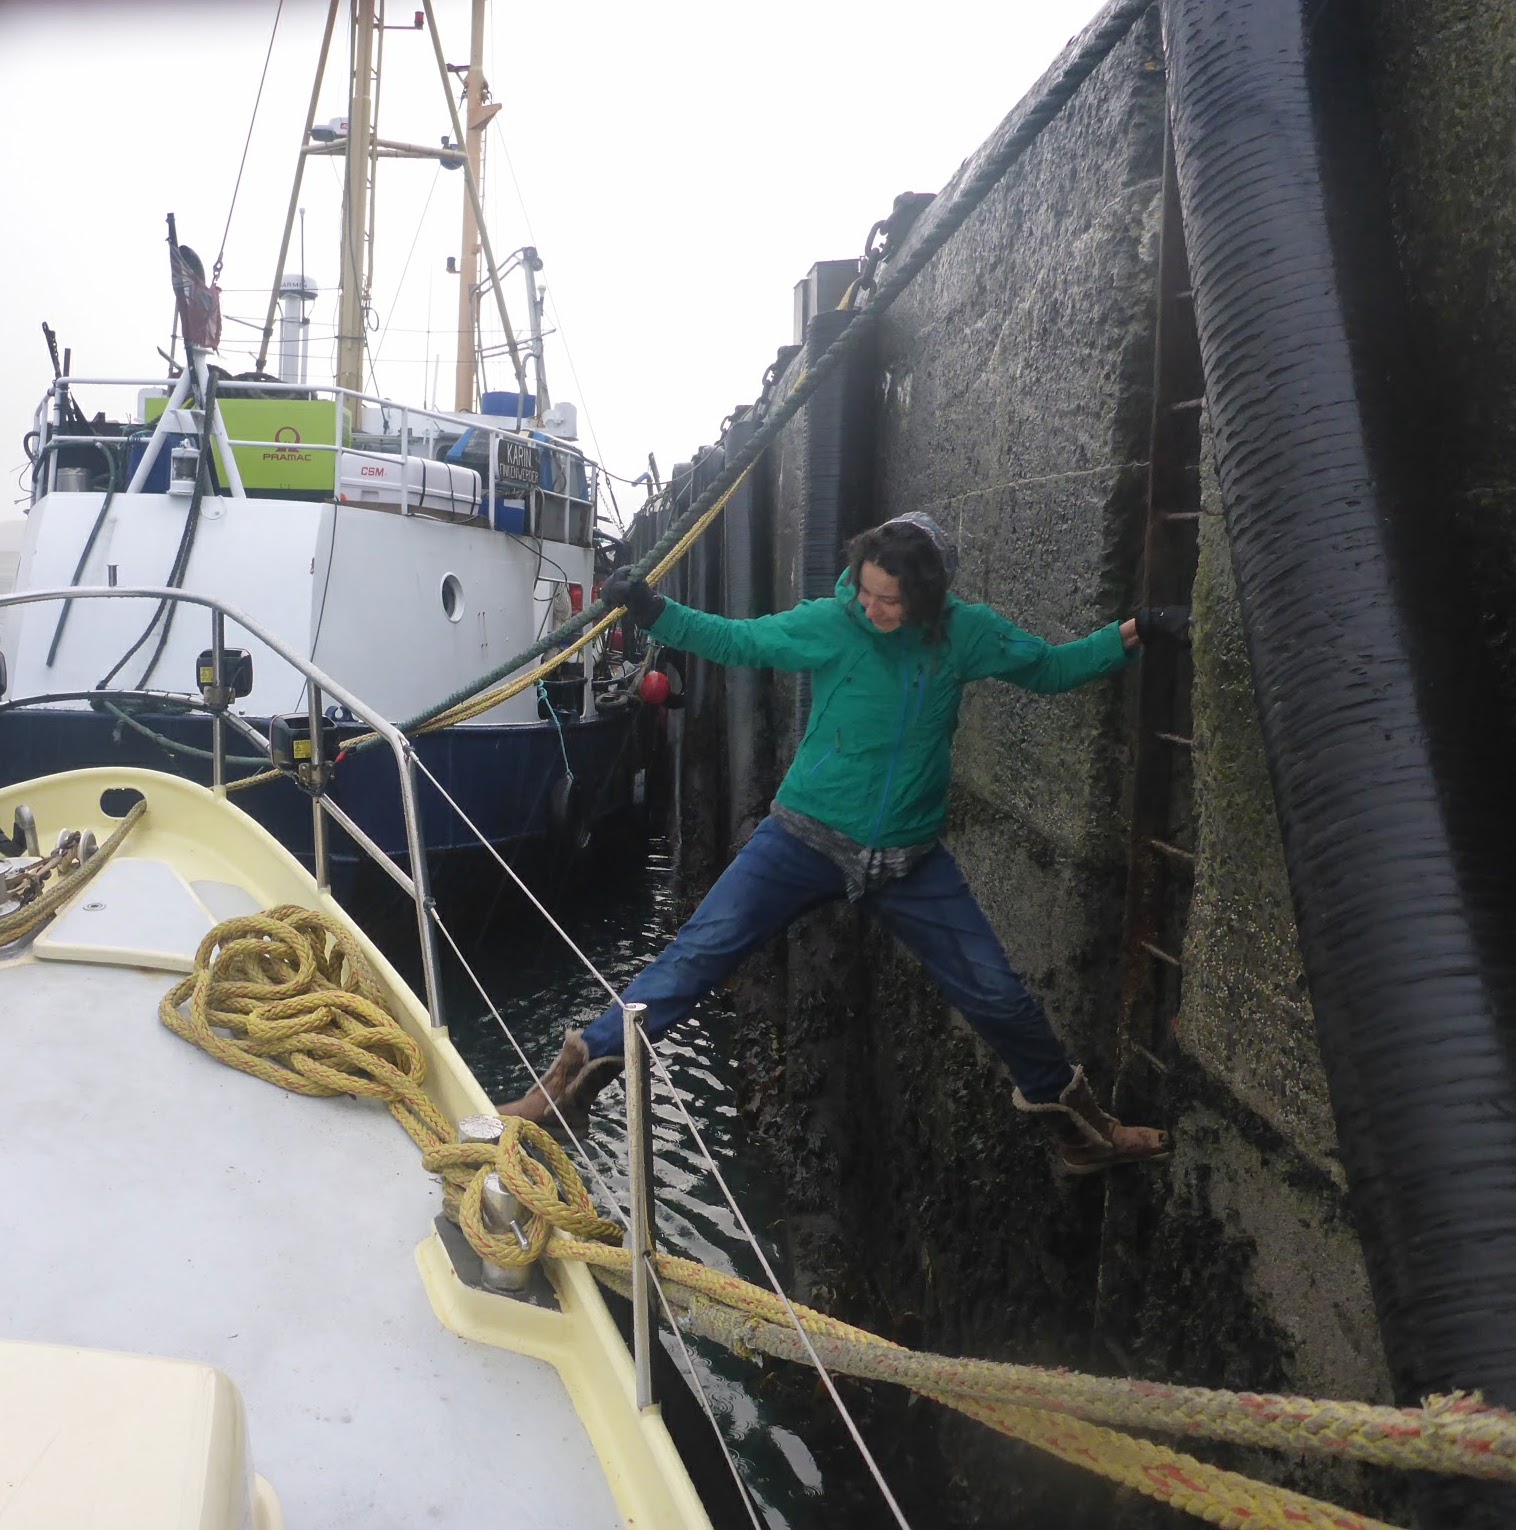 The author pays a visit to a boat crew as part of her job as a data processing field office coordinator in Orkney Islands, Scotland. [Photo] Suzana EL Massri collection